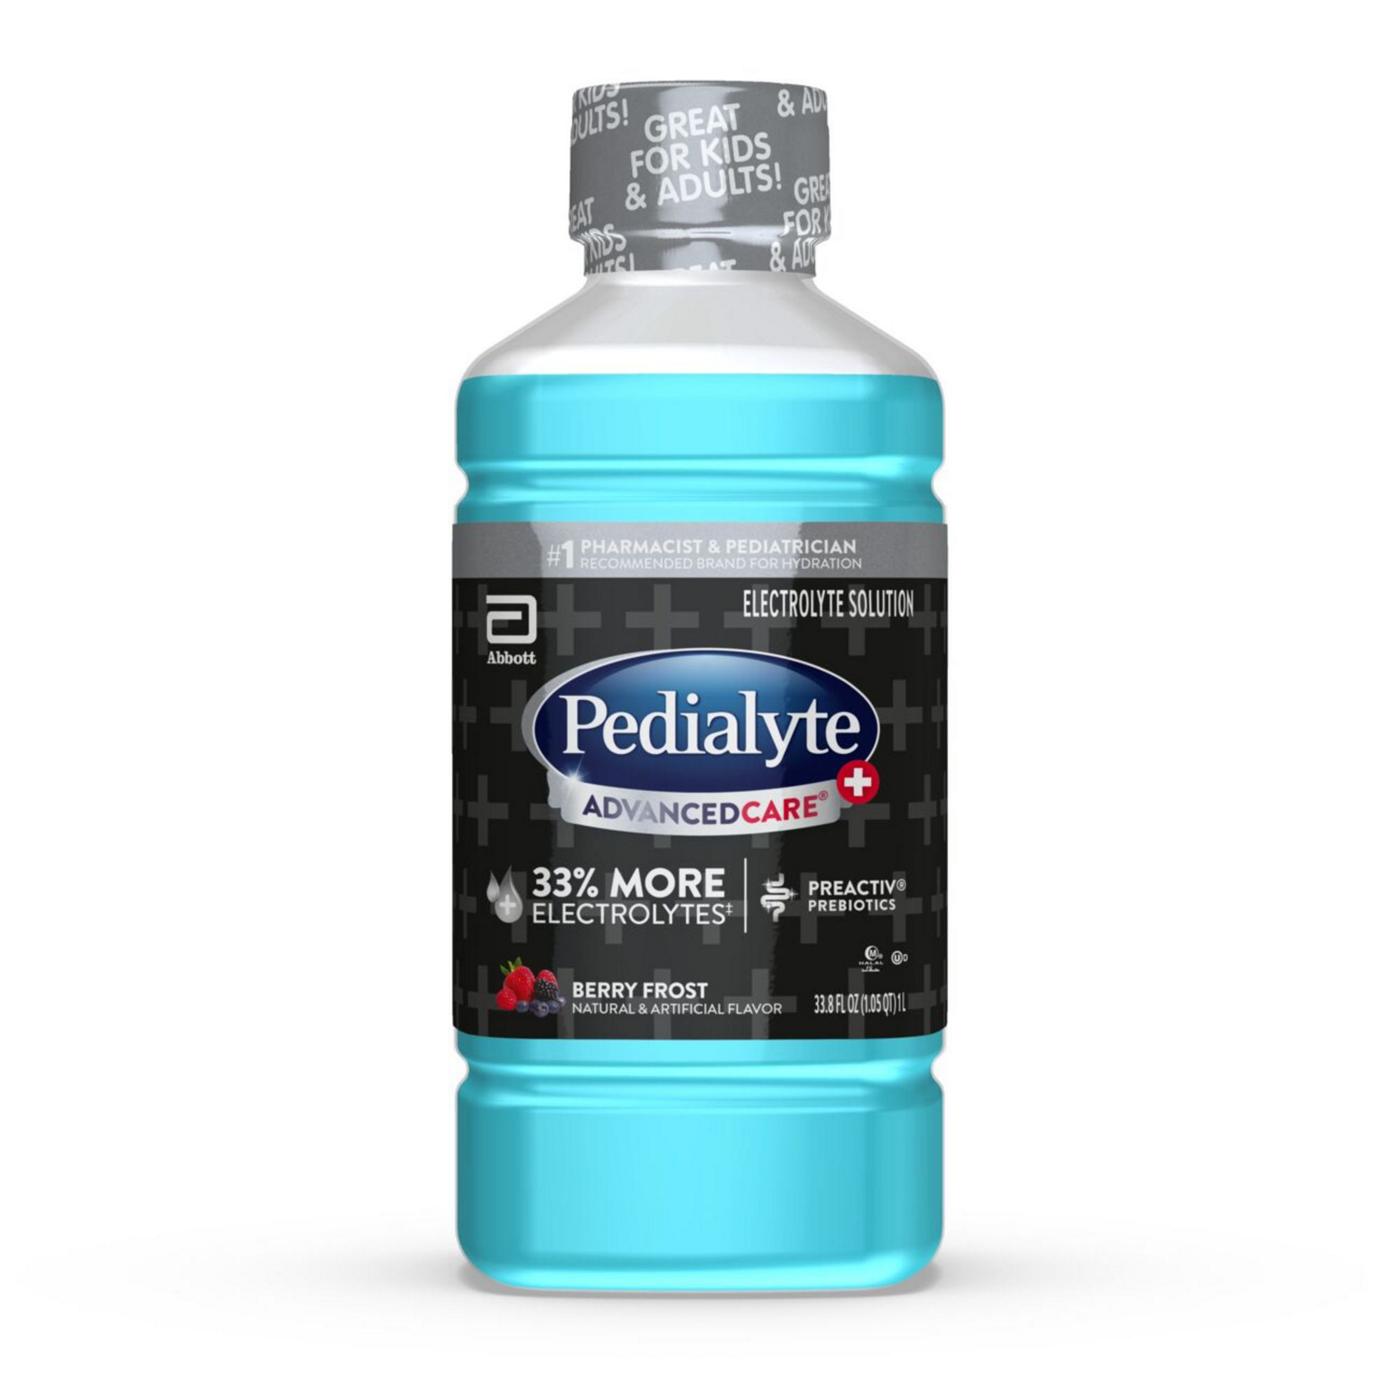 Pedialyte AdvancedCare Plus Electrolyte Solution - Berry Frost; image 1 of 6